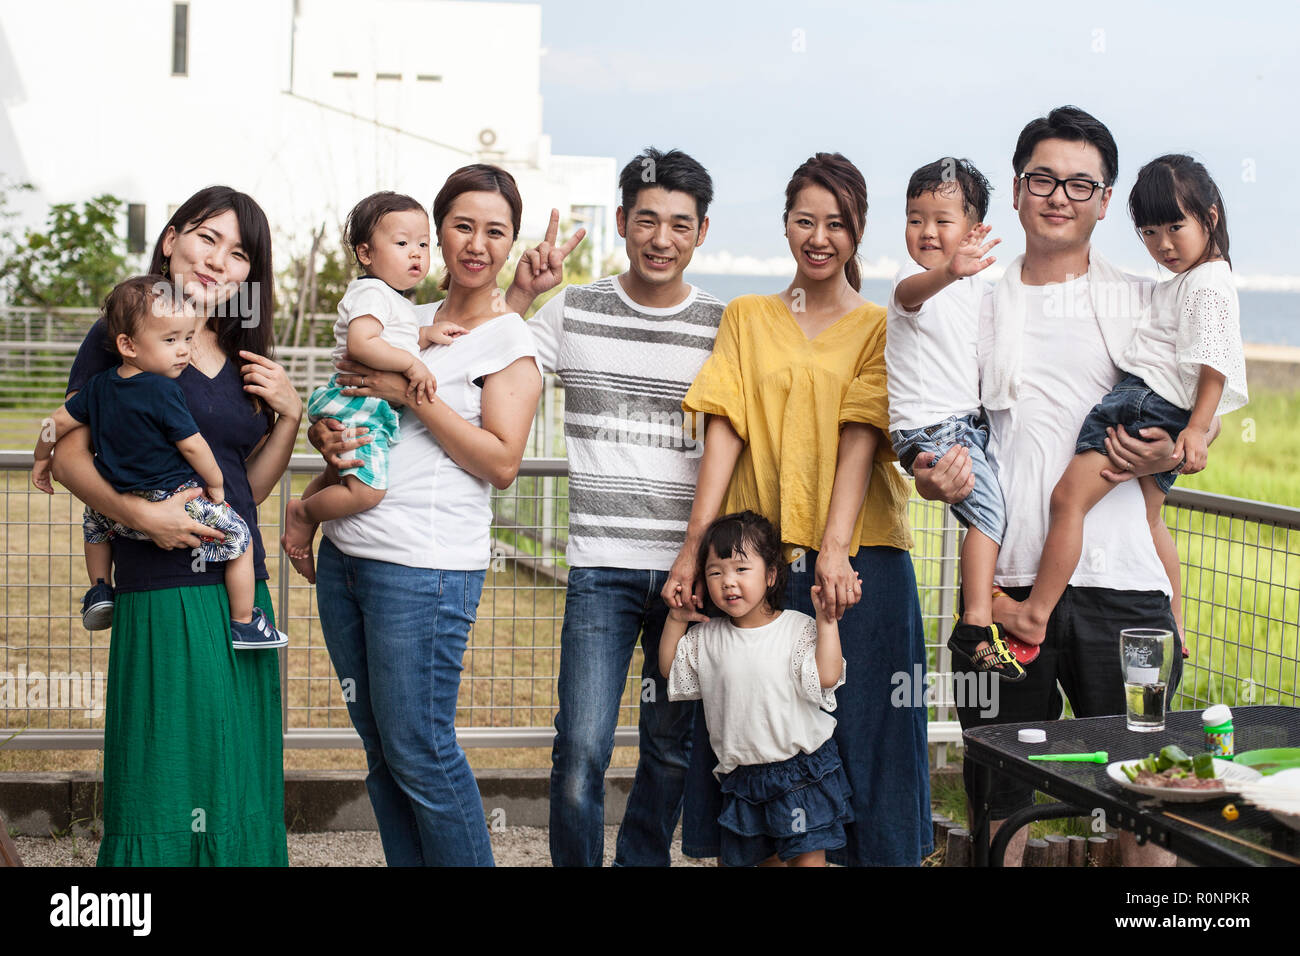 Group portrait of Japanese families with young children standing in a back garden, smiling at camera. Stock Photo